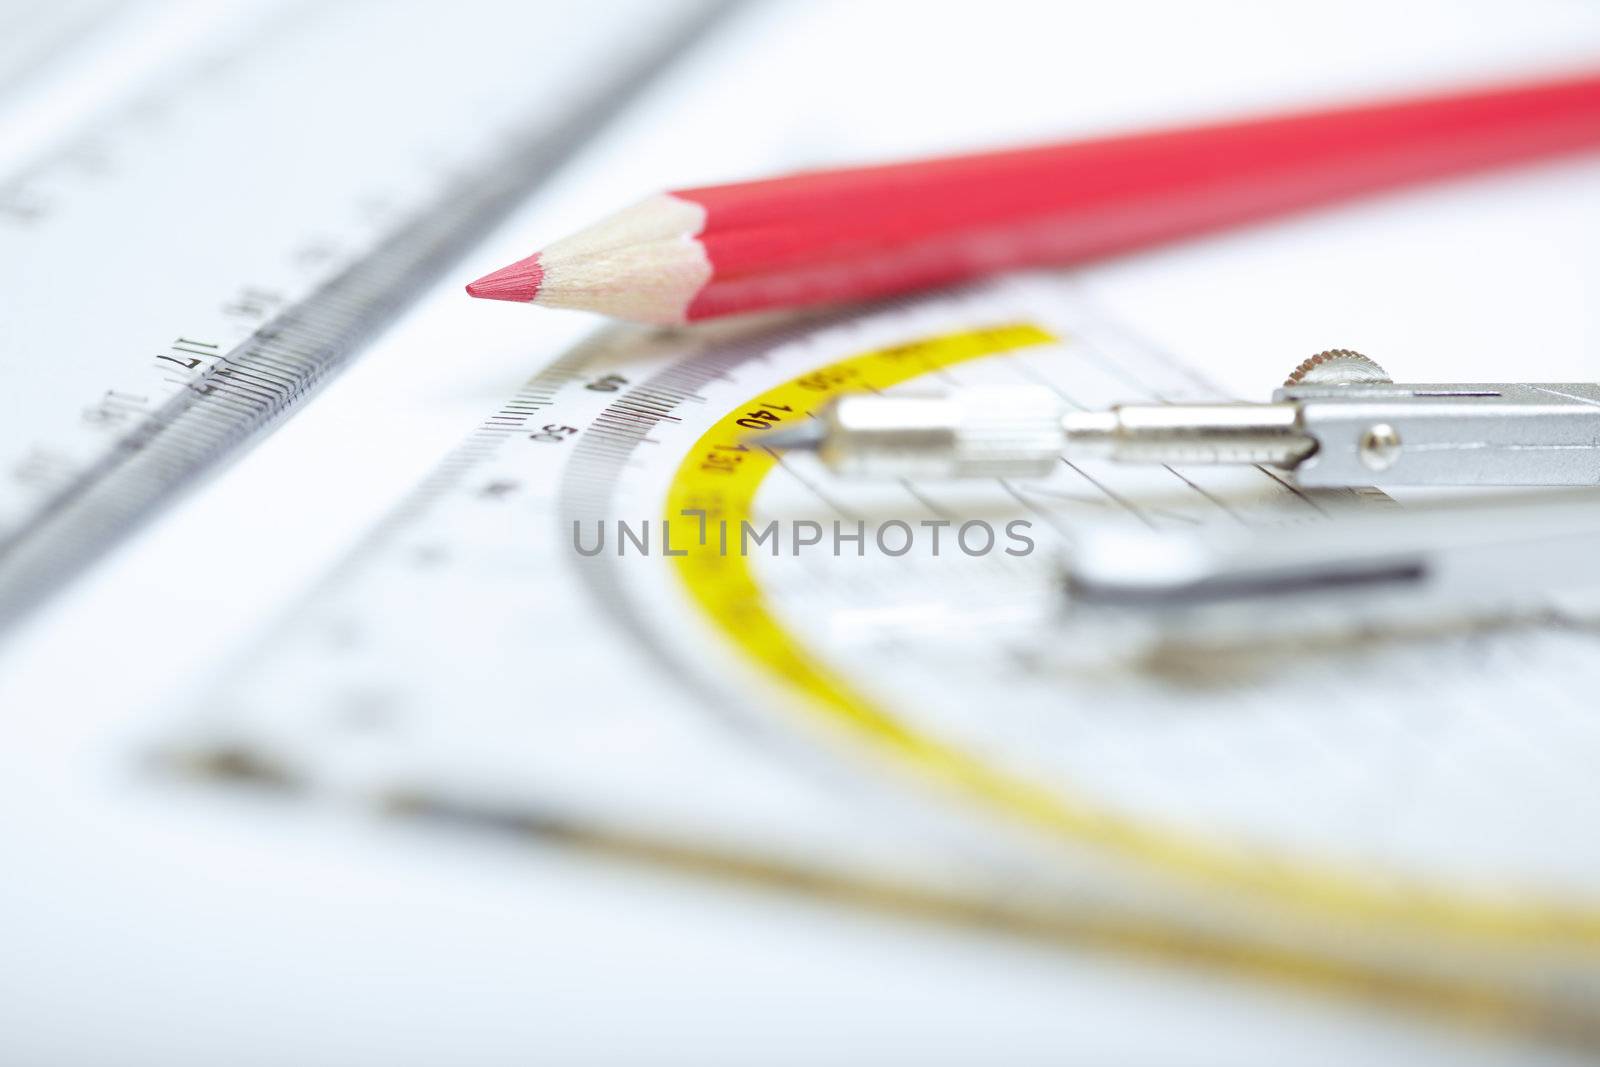 Red pencil with compasses and rulers on a paper. Extremely close-up photo